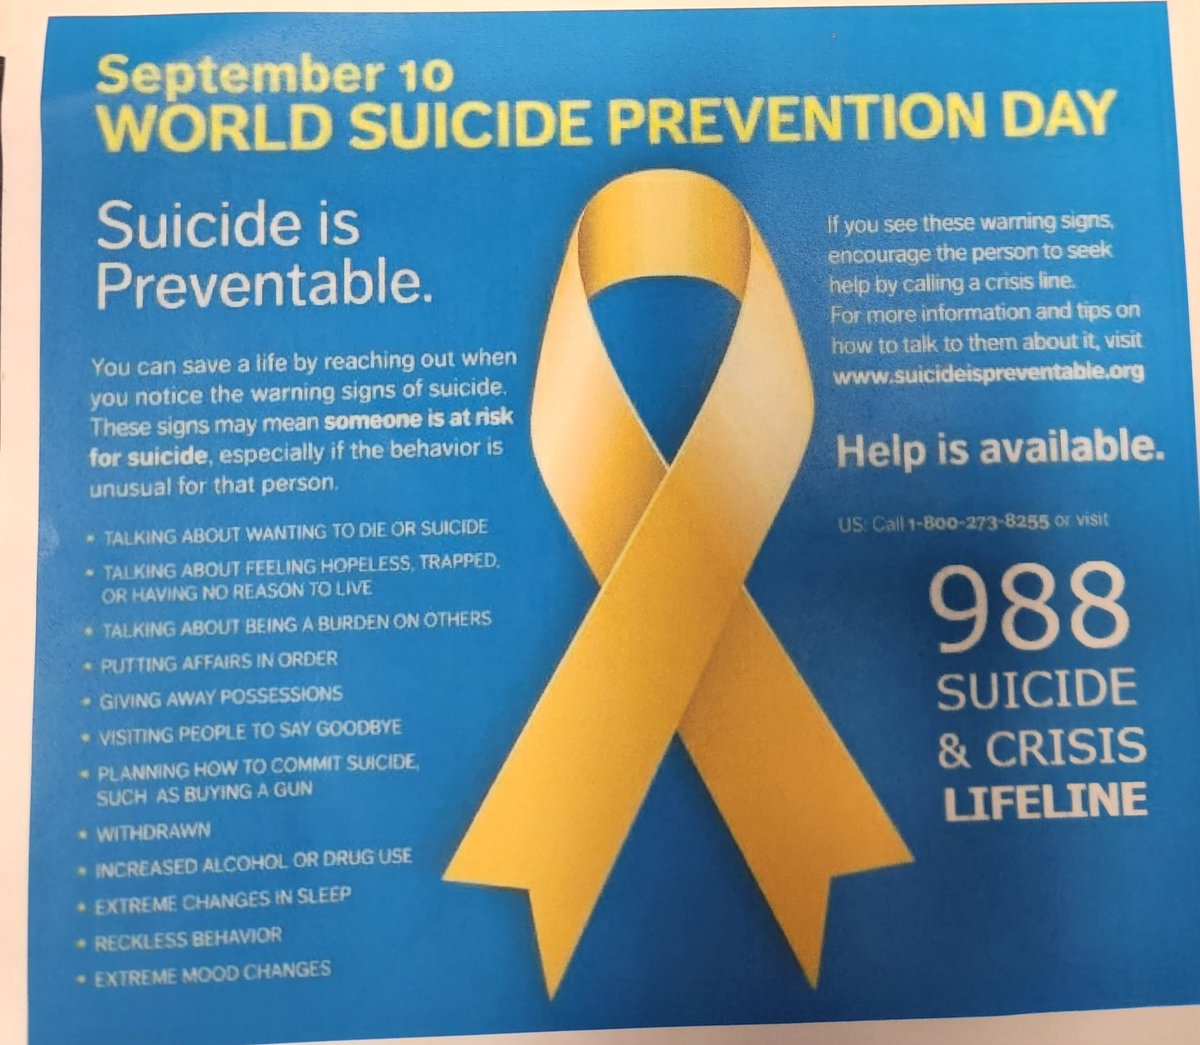 September 10th is World Suicide Prevention Day ❤️ Know the Signs to Look For #988 #CHSCounselors #SuicideCrisisLifeline #CounselorsCare #IfYouThinkNobodyCaresThinkAgain